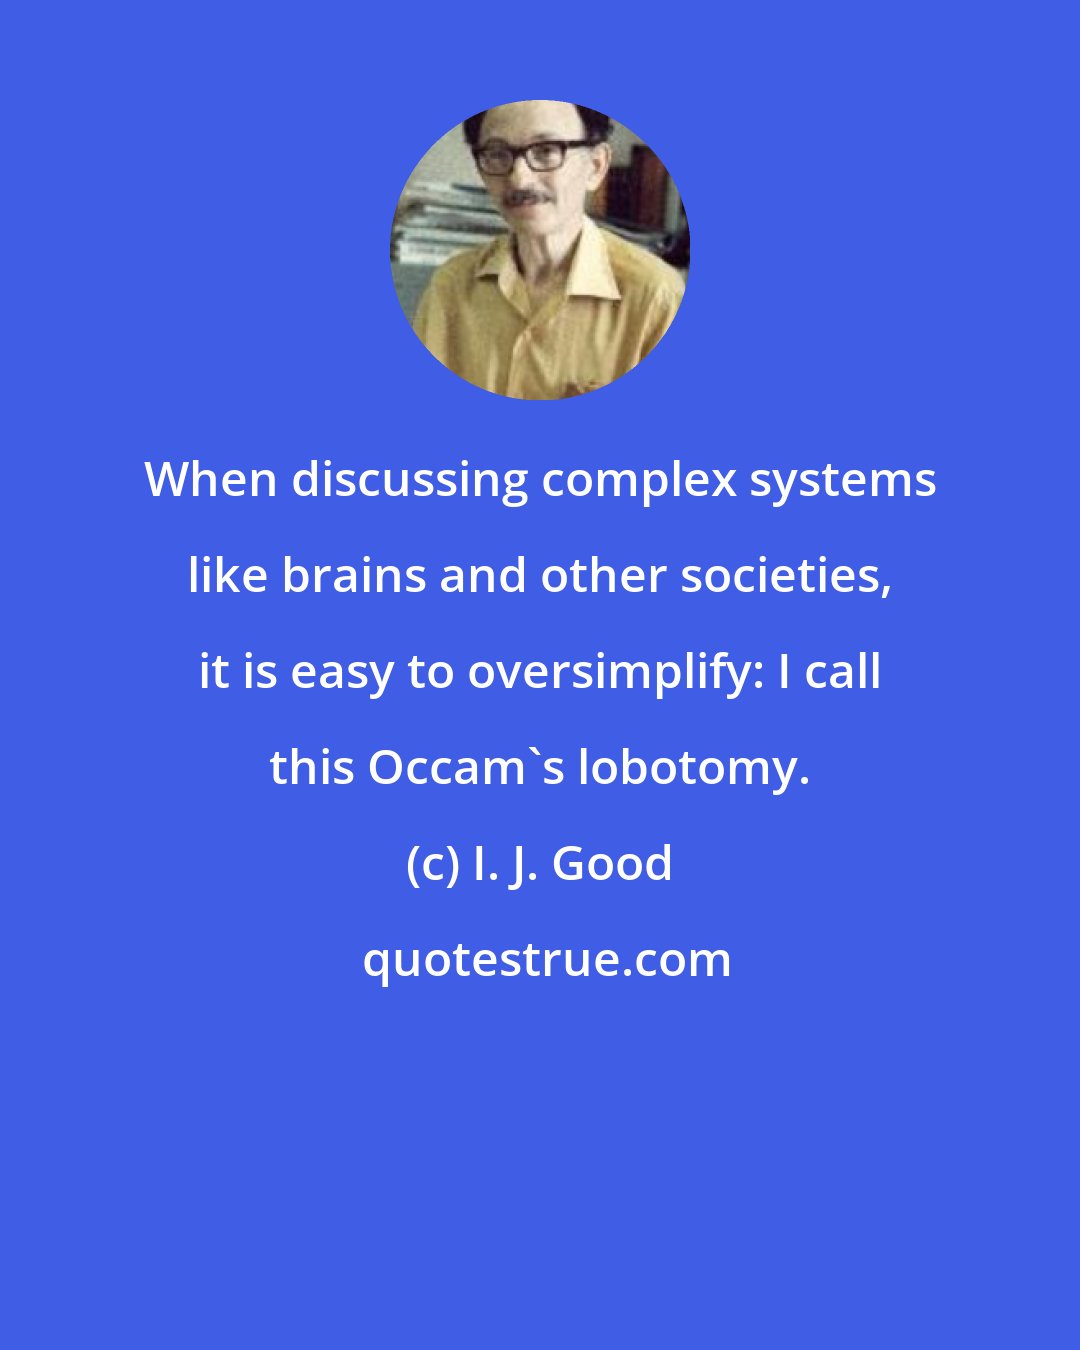 I. J. Good: When discussing complex systems like brains and other societies, it is easy to oversimplify: I call this Occam's lobotomy.